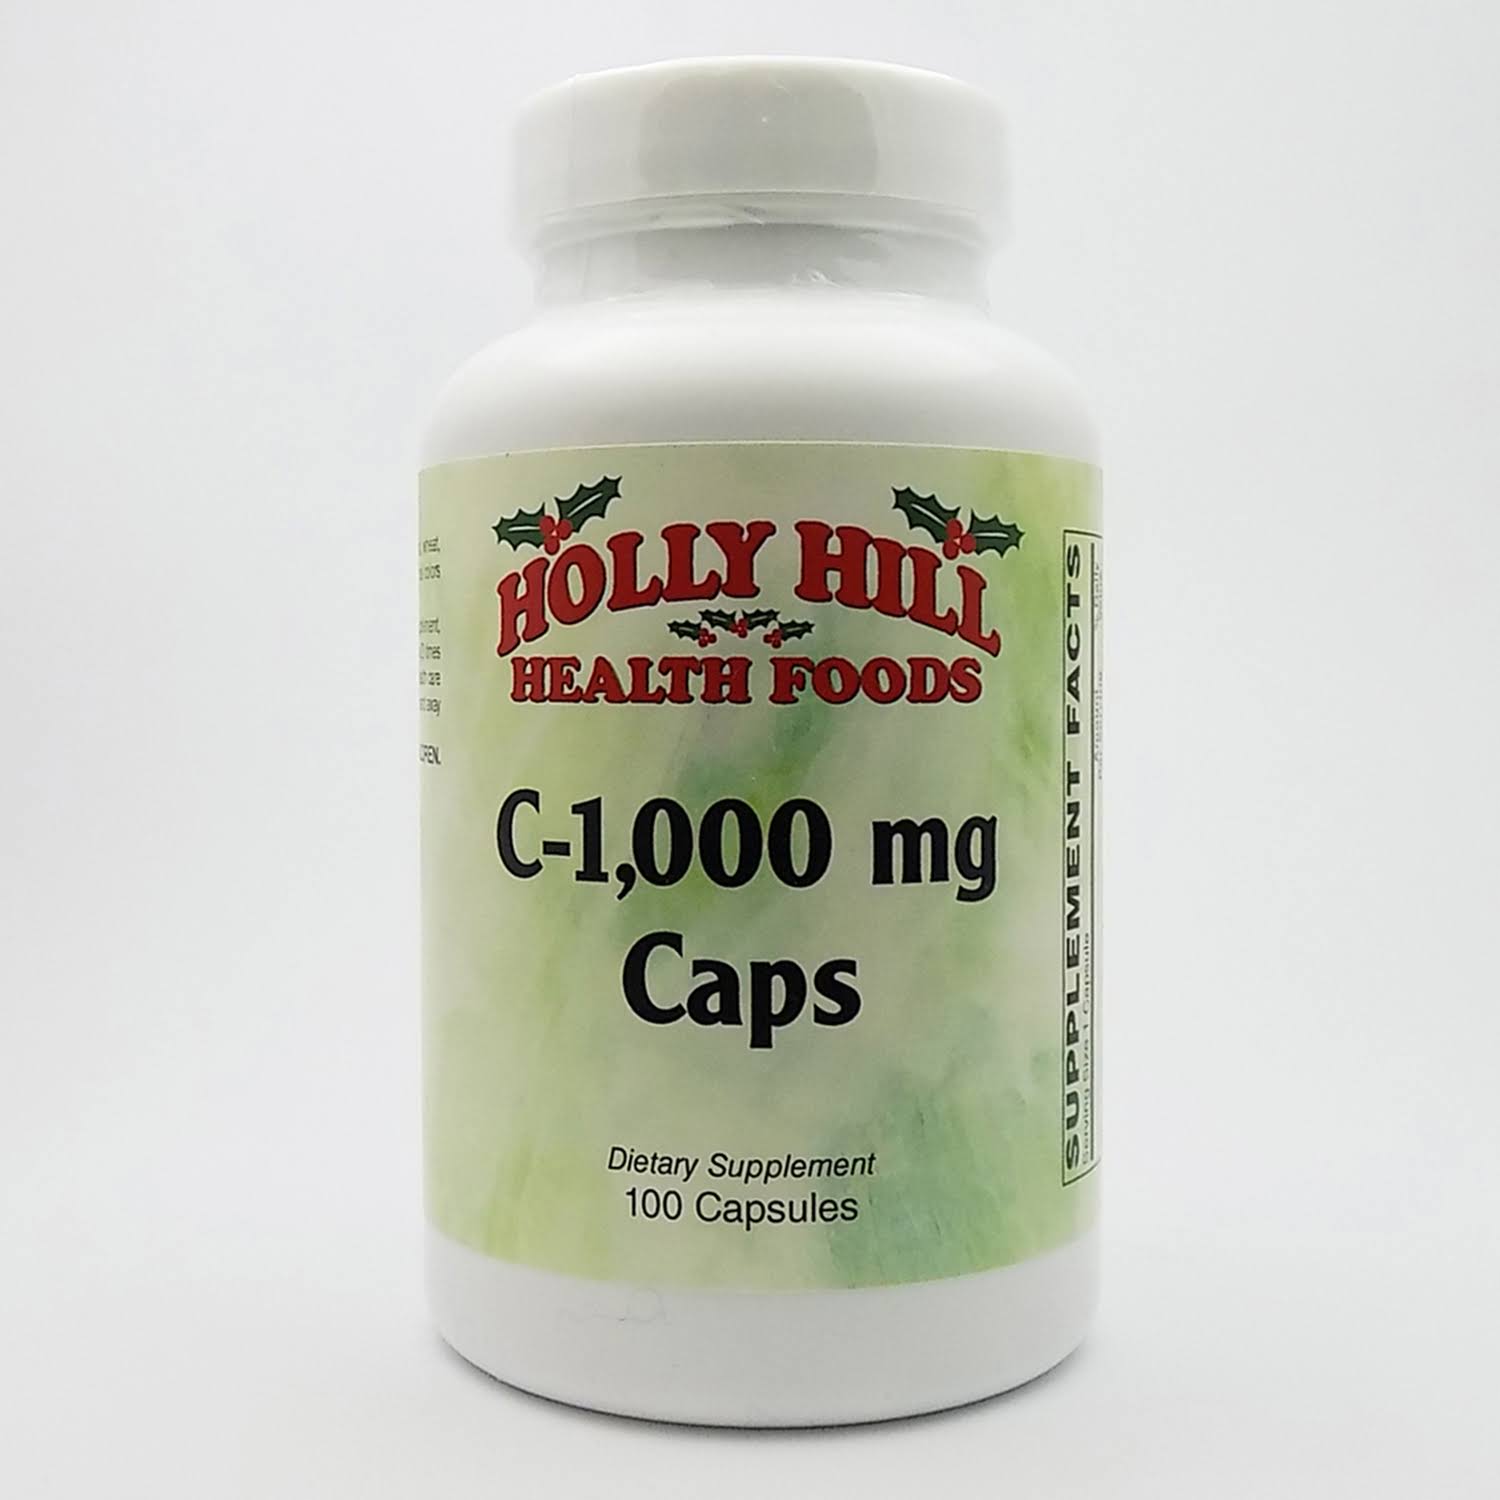 Holly Hill Health Foods, C-1000 mg, 100 Capsules